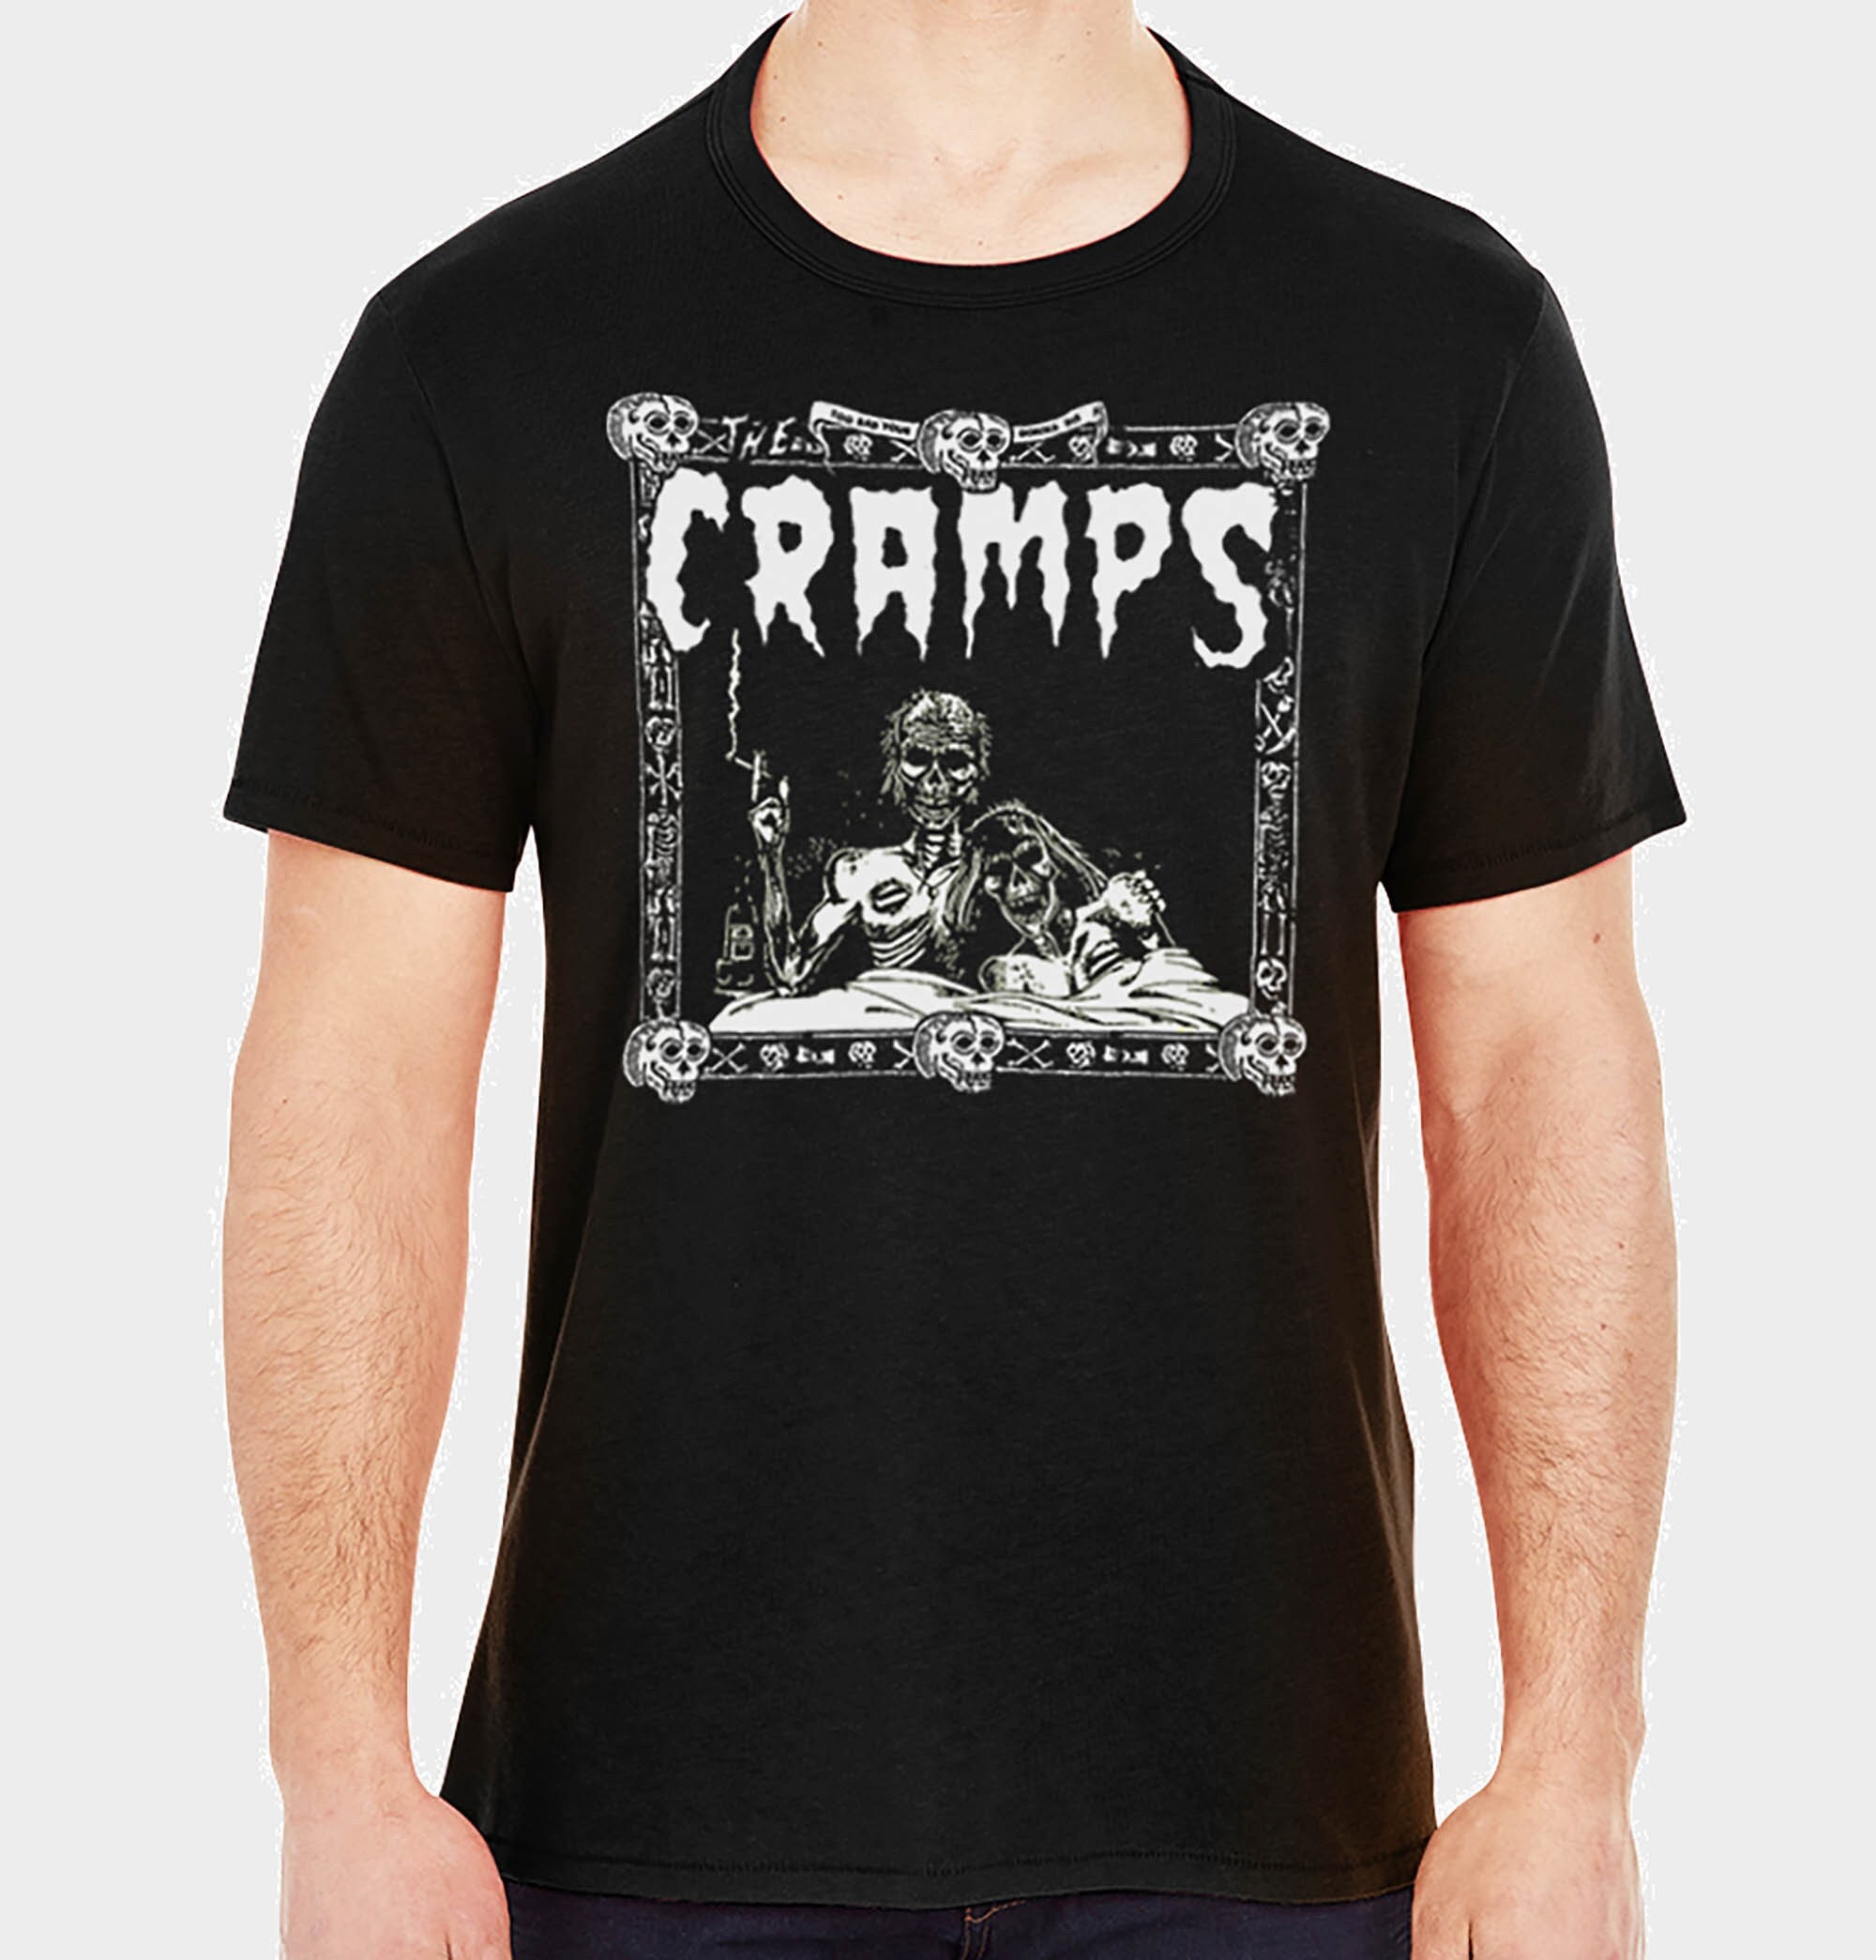 Discover the Cramps Tshirts